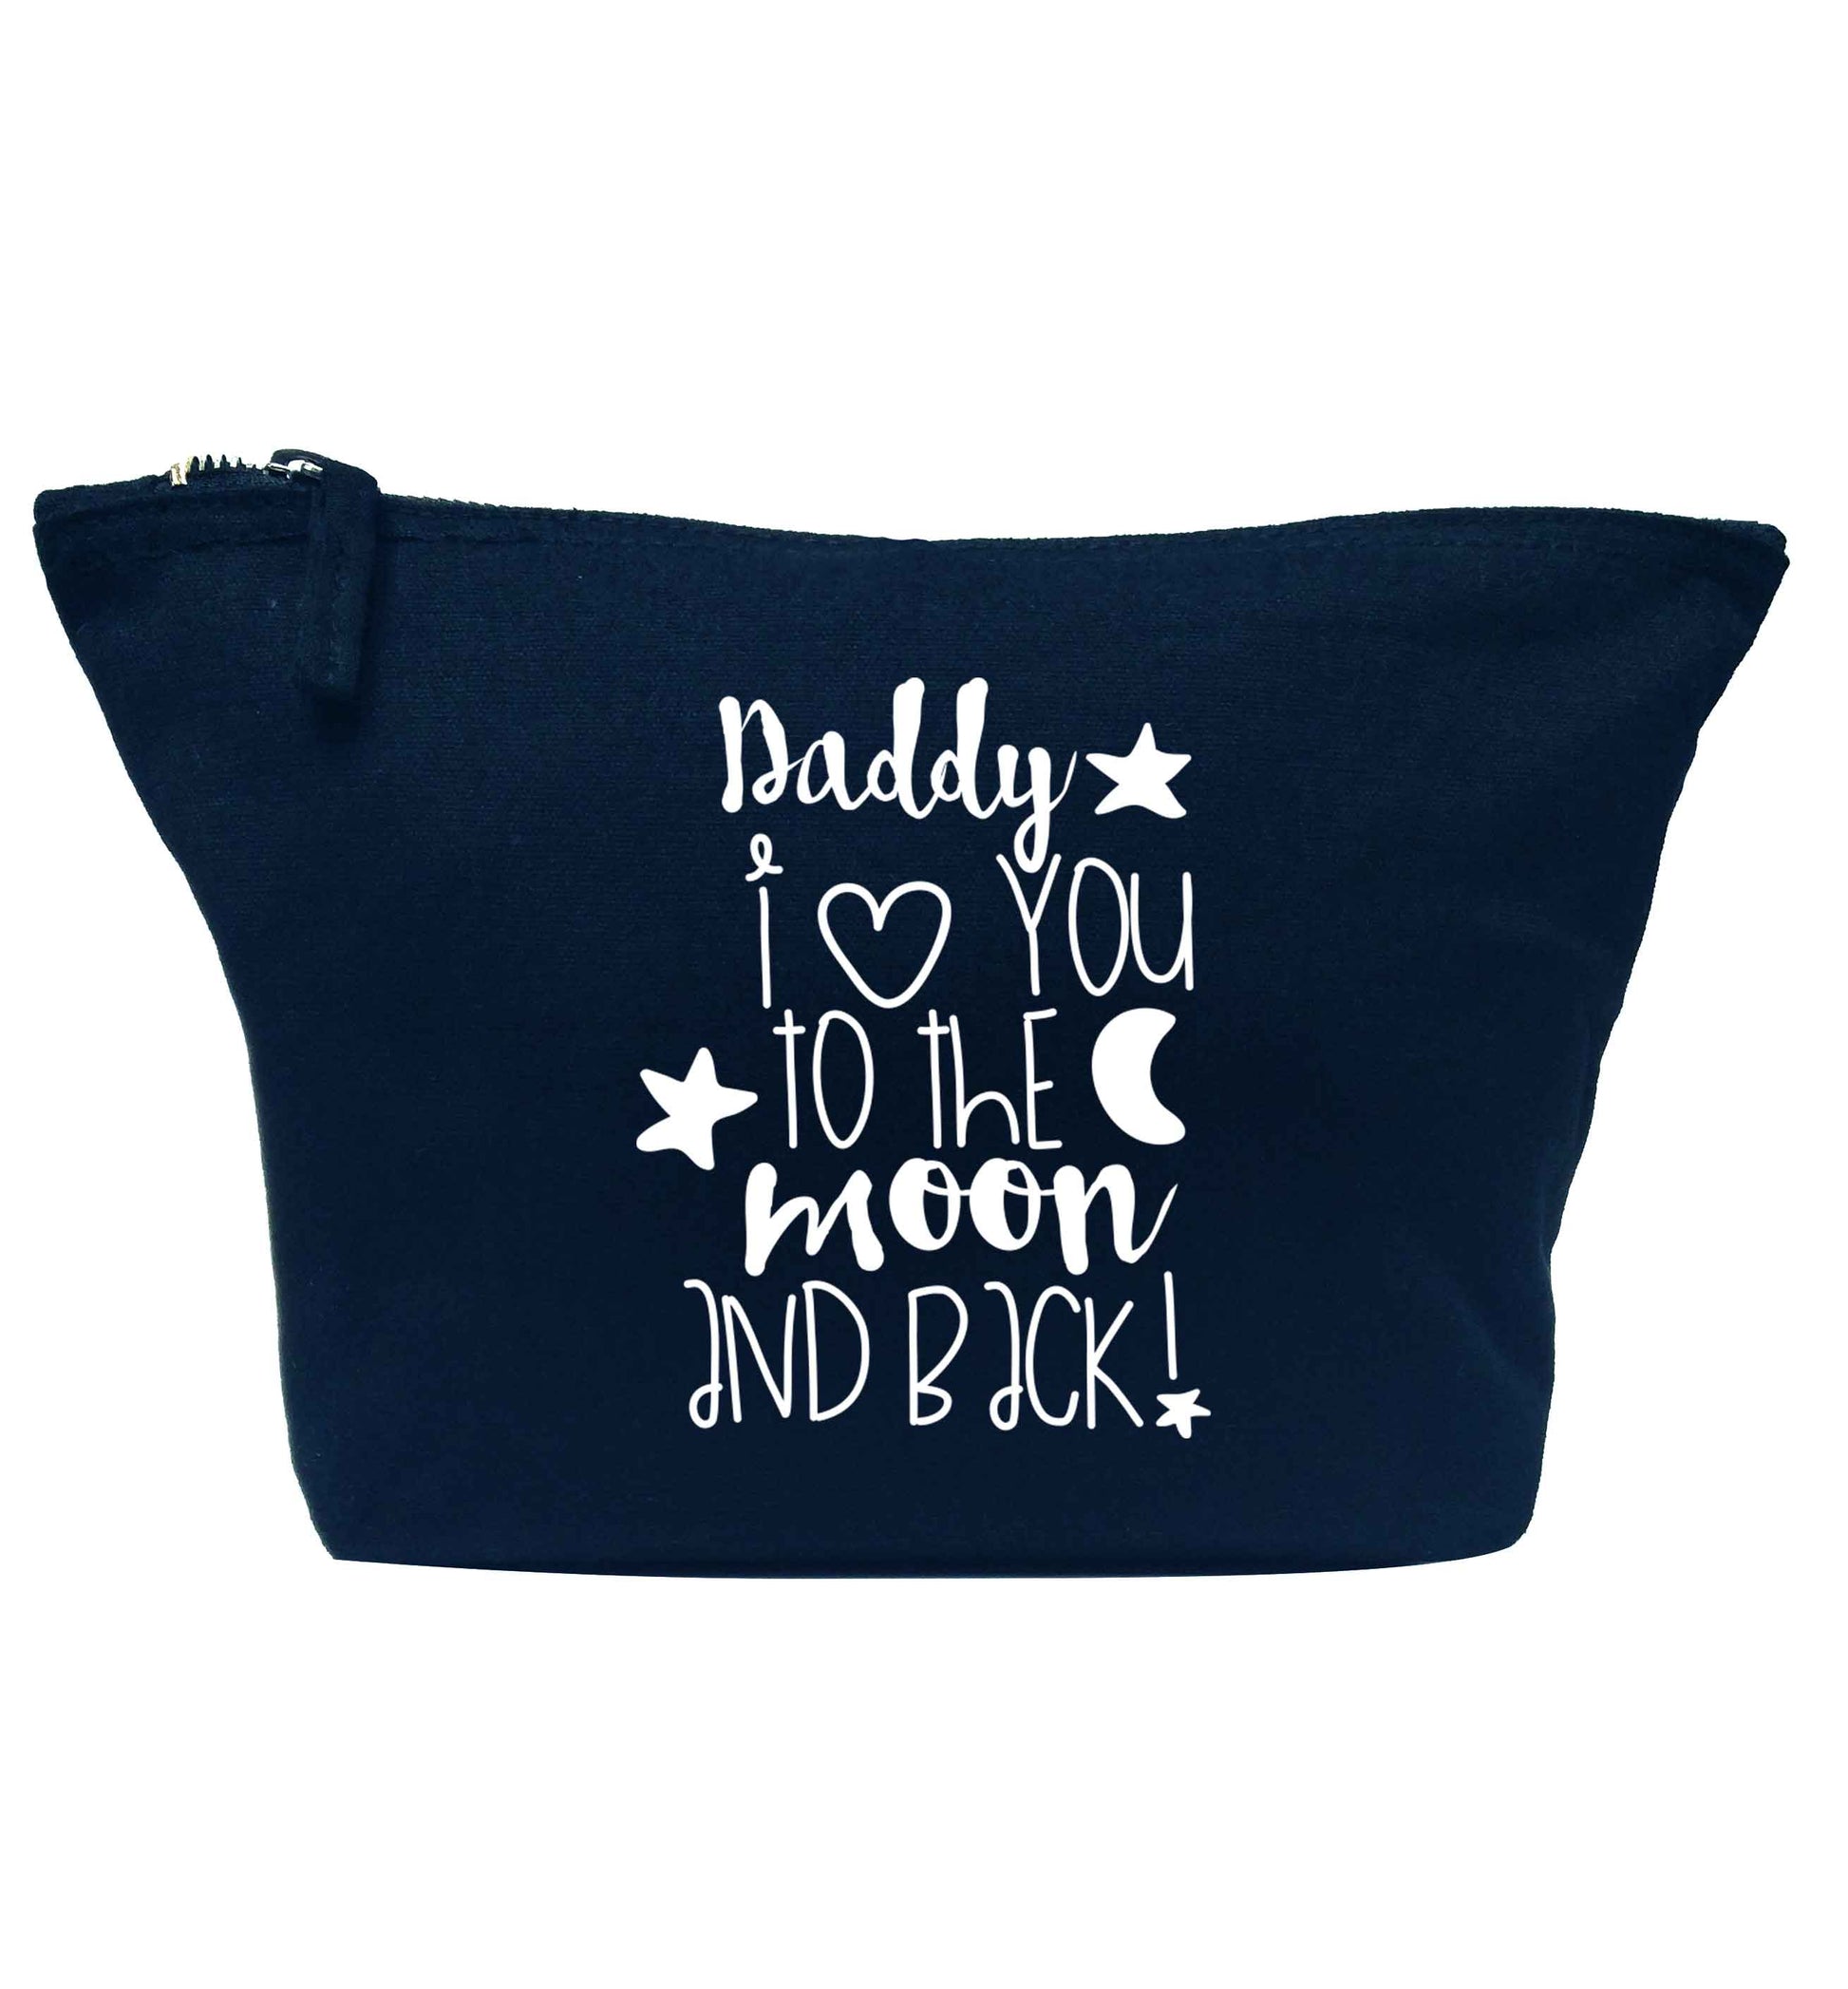 Daddy I love you to the moon and back navy makeup bag